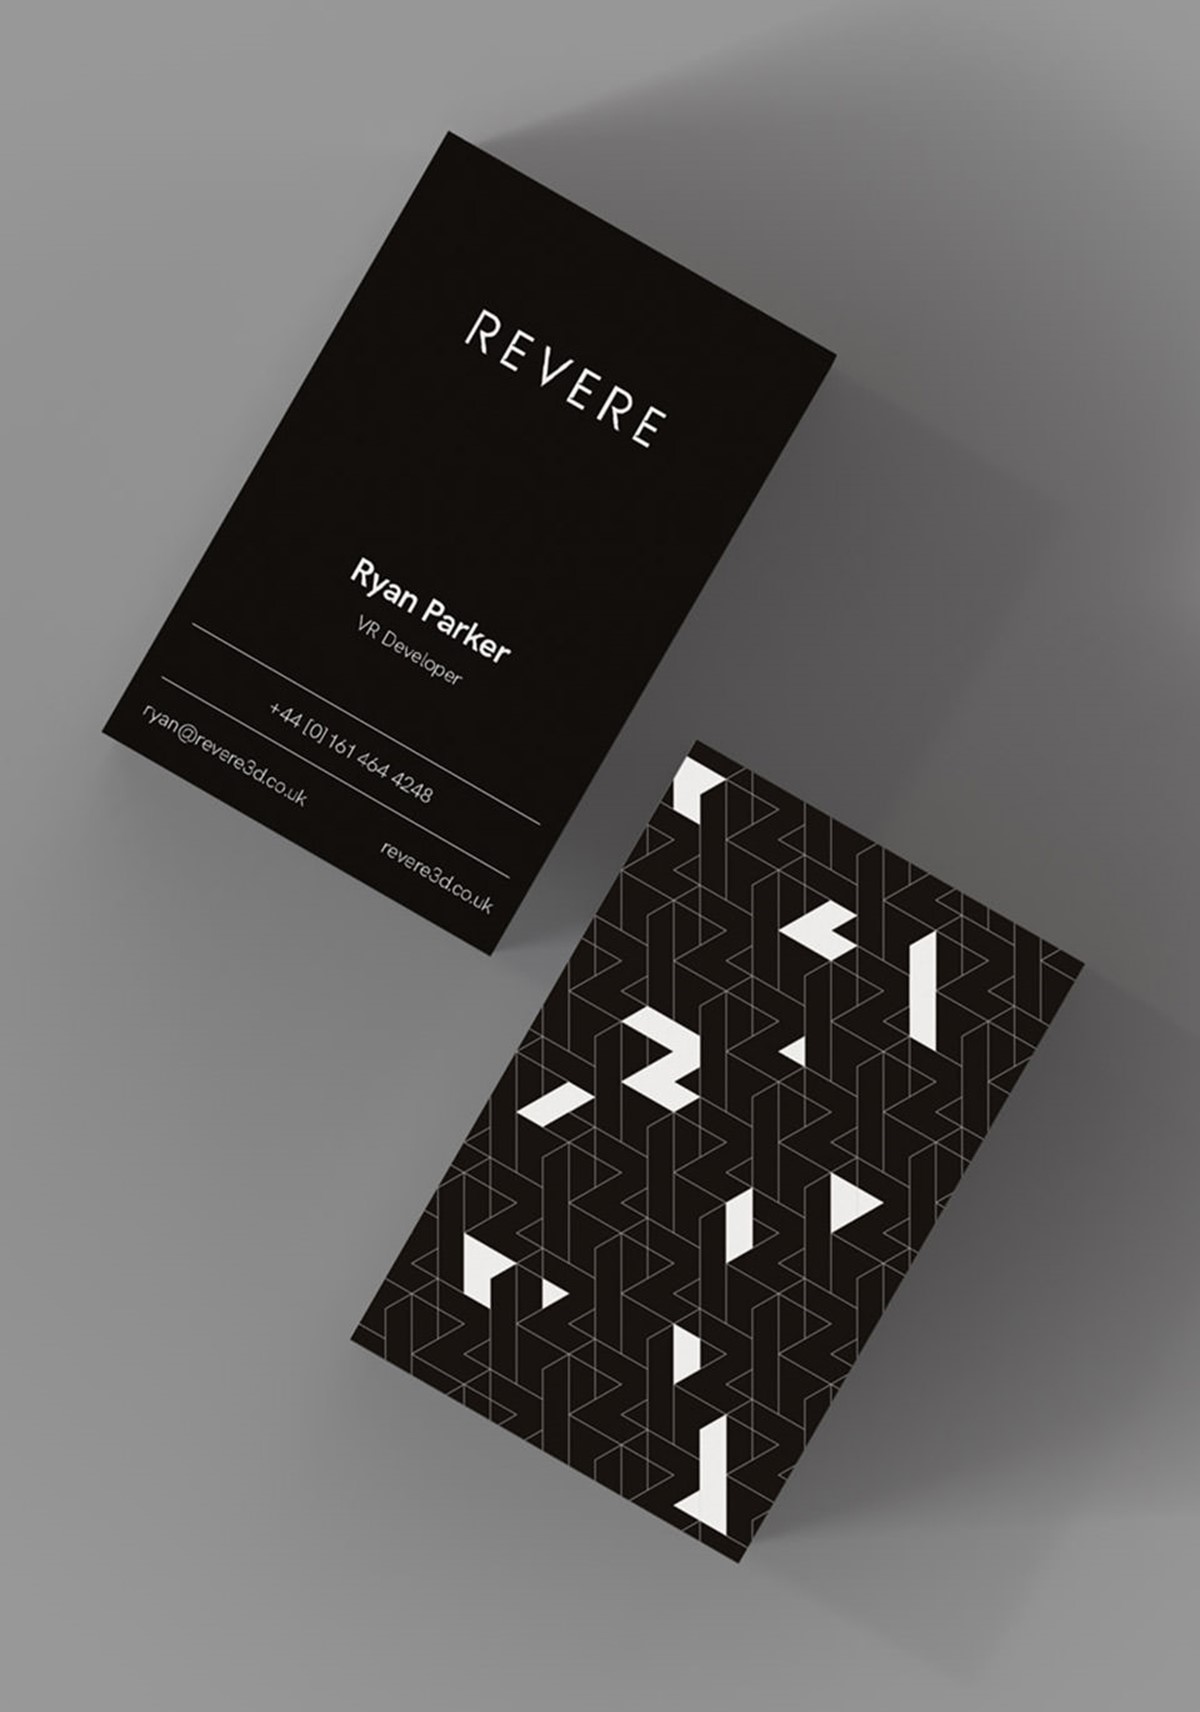 Revere. Geometric pattern business cards mock-up. Brand identity design by Superfried. Manchester.